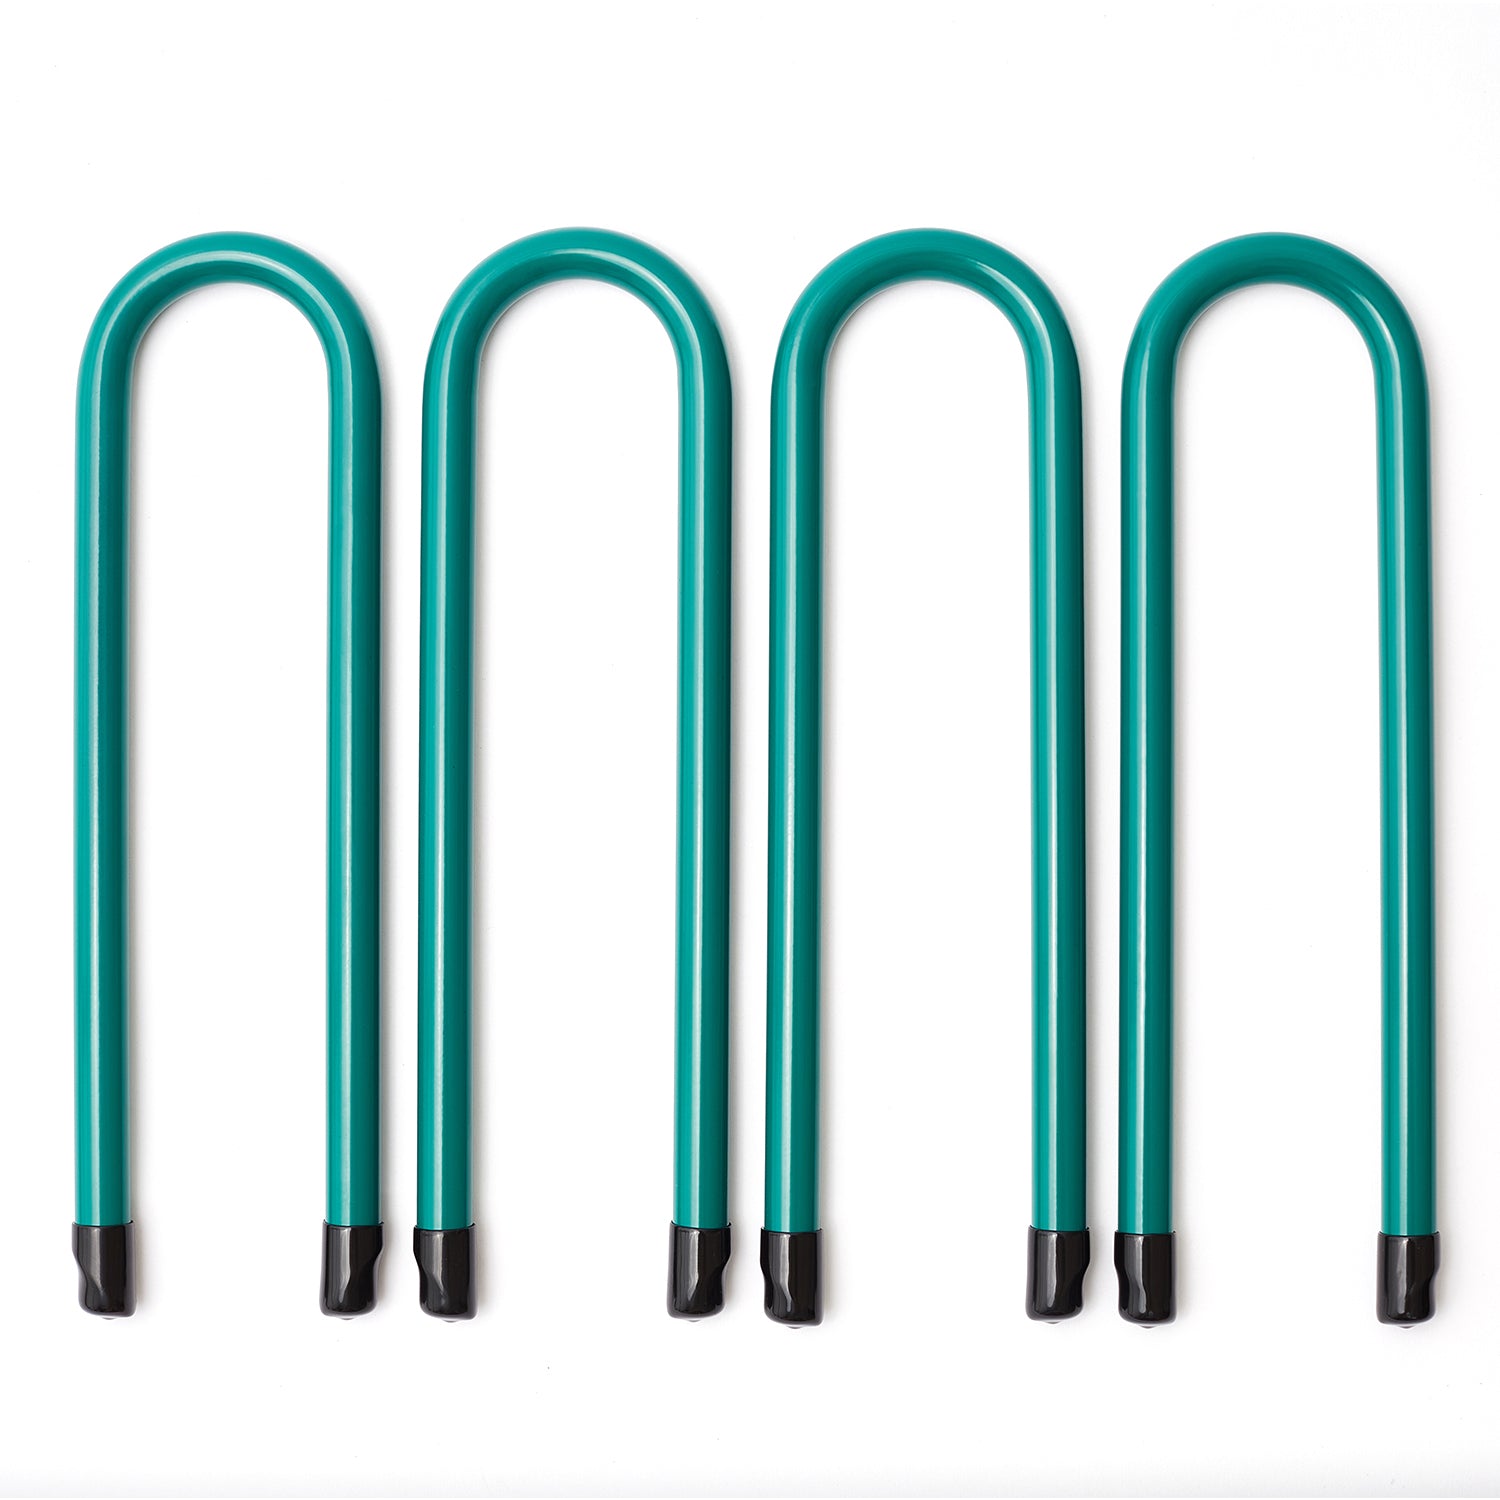 SkyBound Trampoline U-Shaped Anchor Kits - Heavy Duty Wind Stakes - Unique End-Cap Designed for Safety and Easy Install - Trampoline Accessories for Outdoor Protection - Set of 4 - Green.